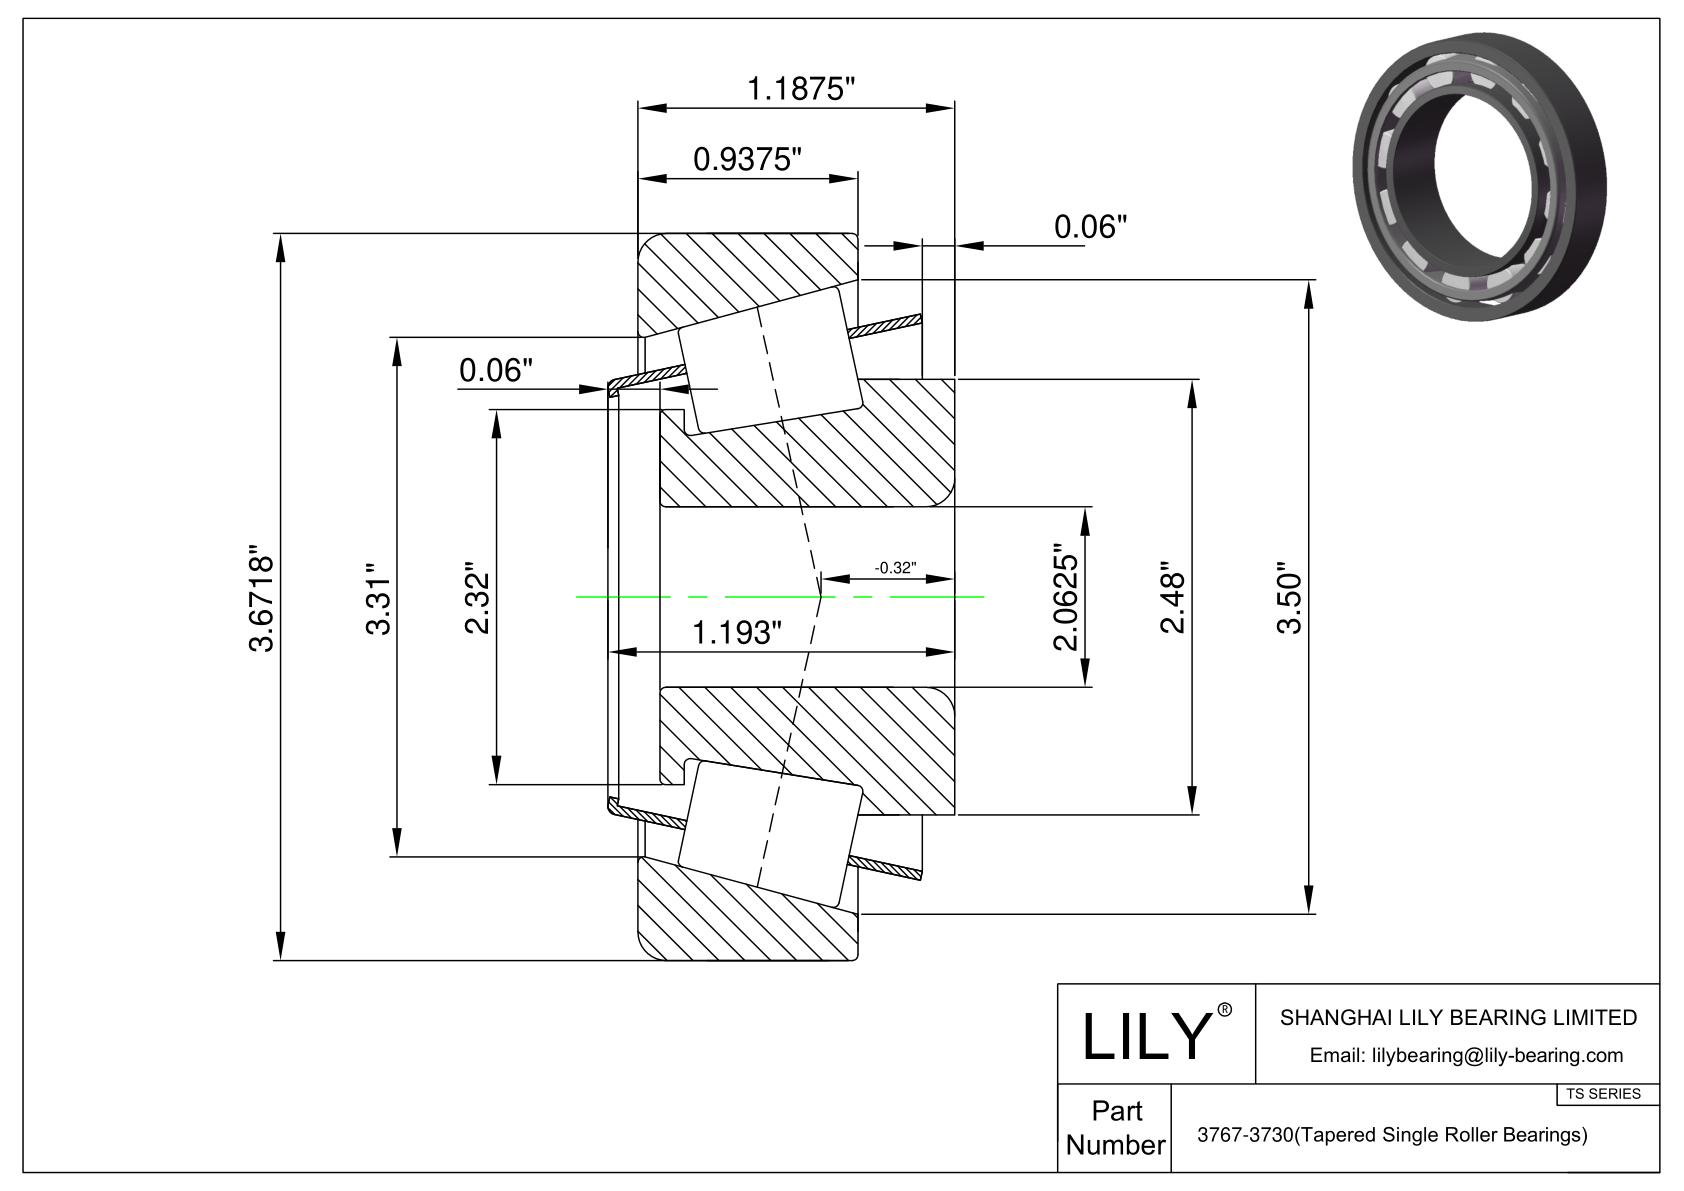 3767-3730 TS (Tapered Single Roller Bearings) (Imperial) cad drawing